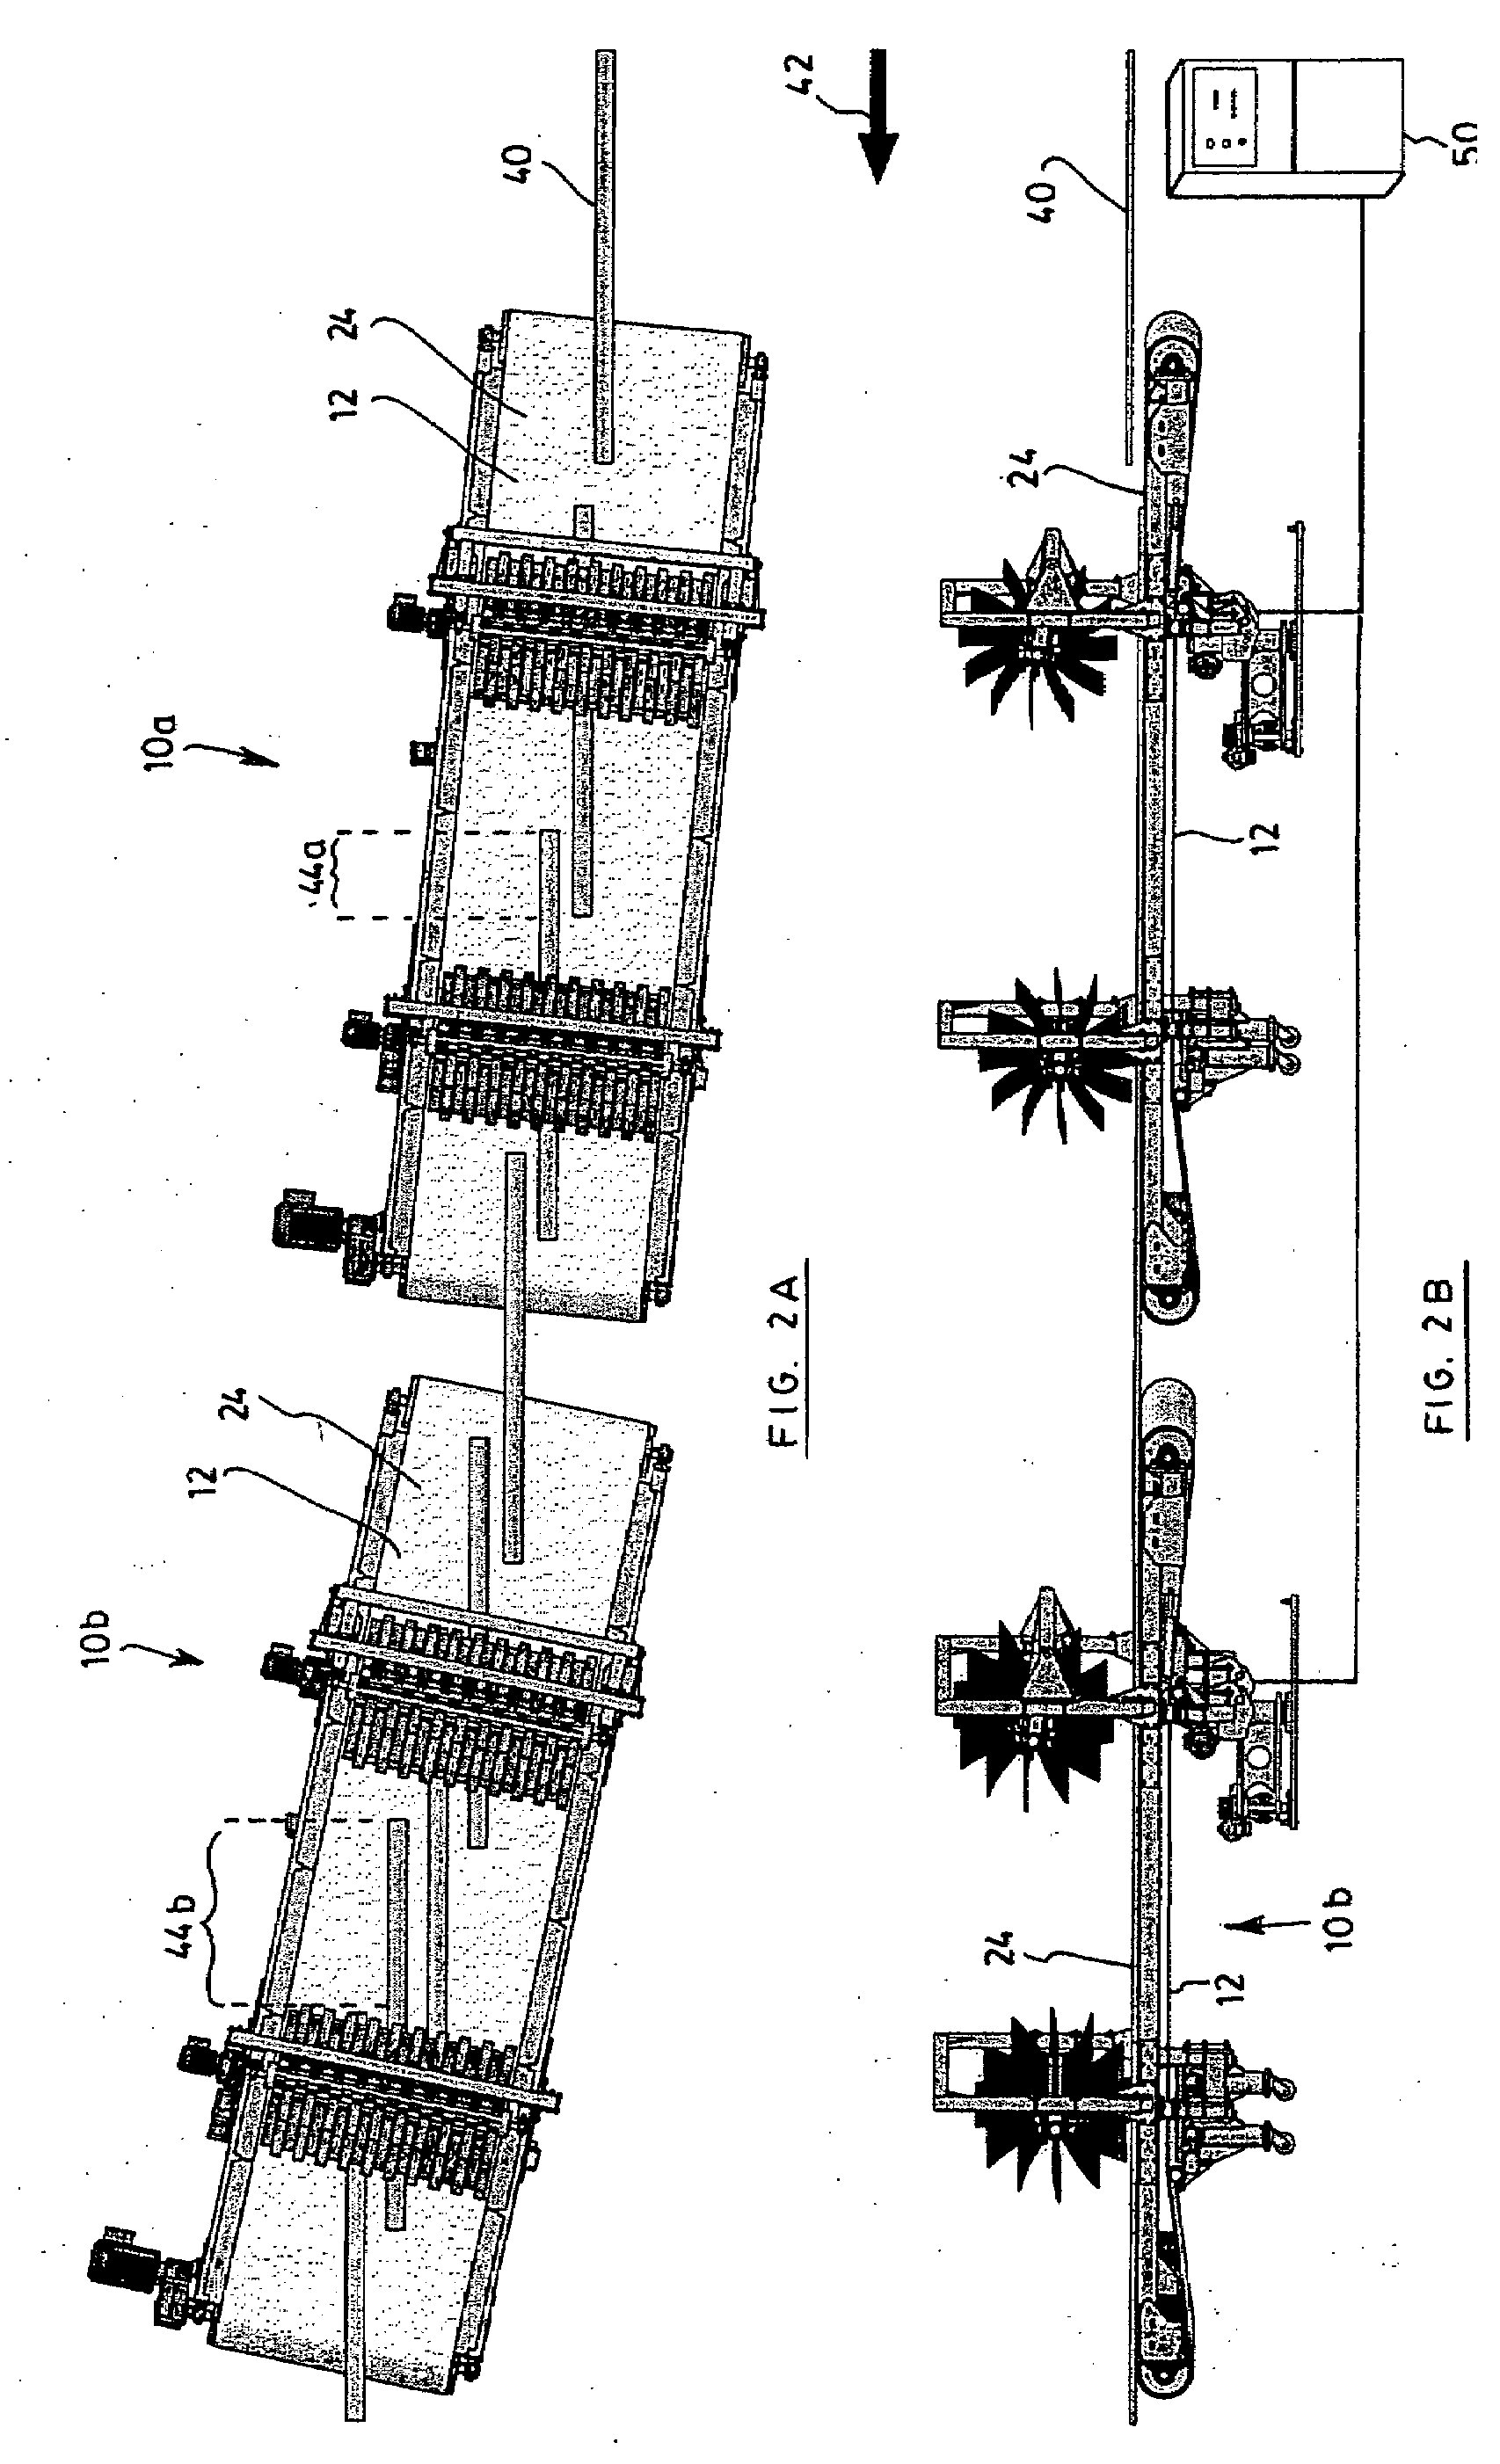 Adjustment system for a speed reduction belt assembly